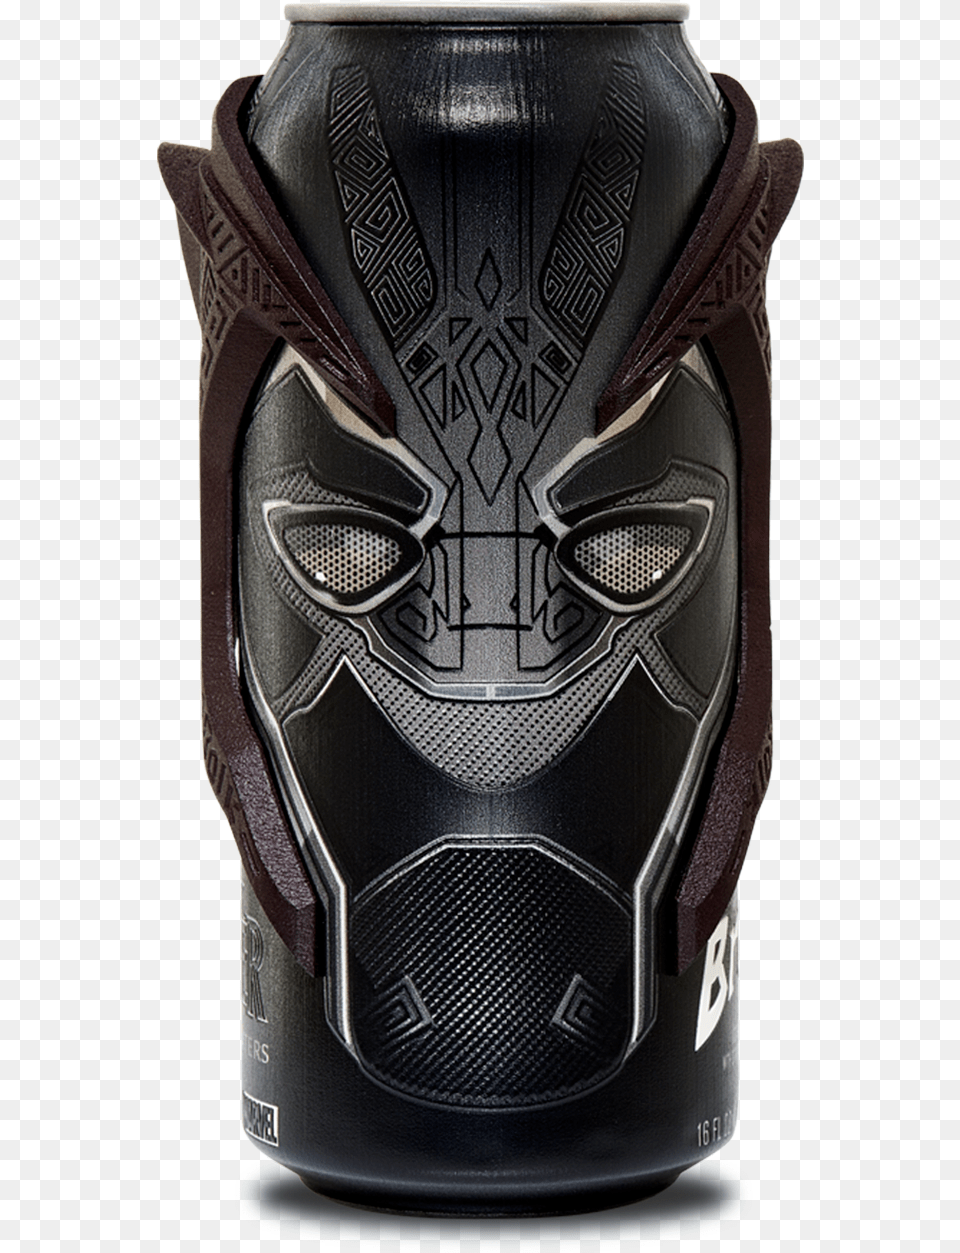 Black Panther Can Breastplate, Emblem, Symbol, Architecture, Clothing Png Image